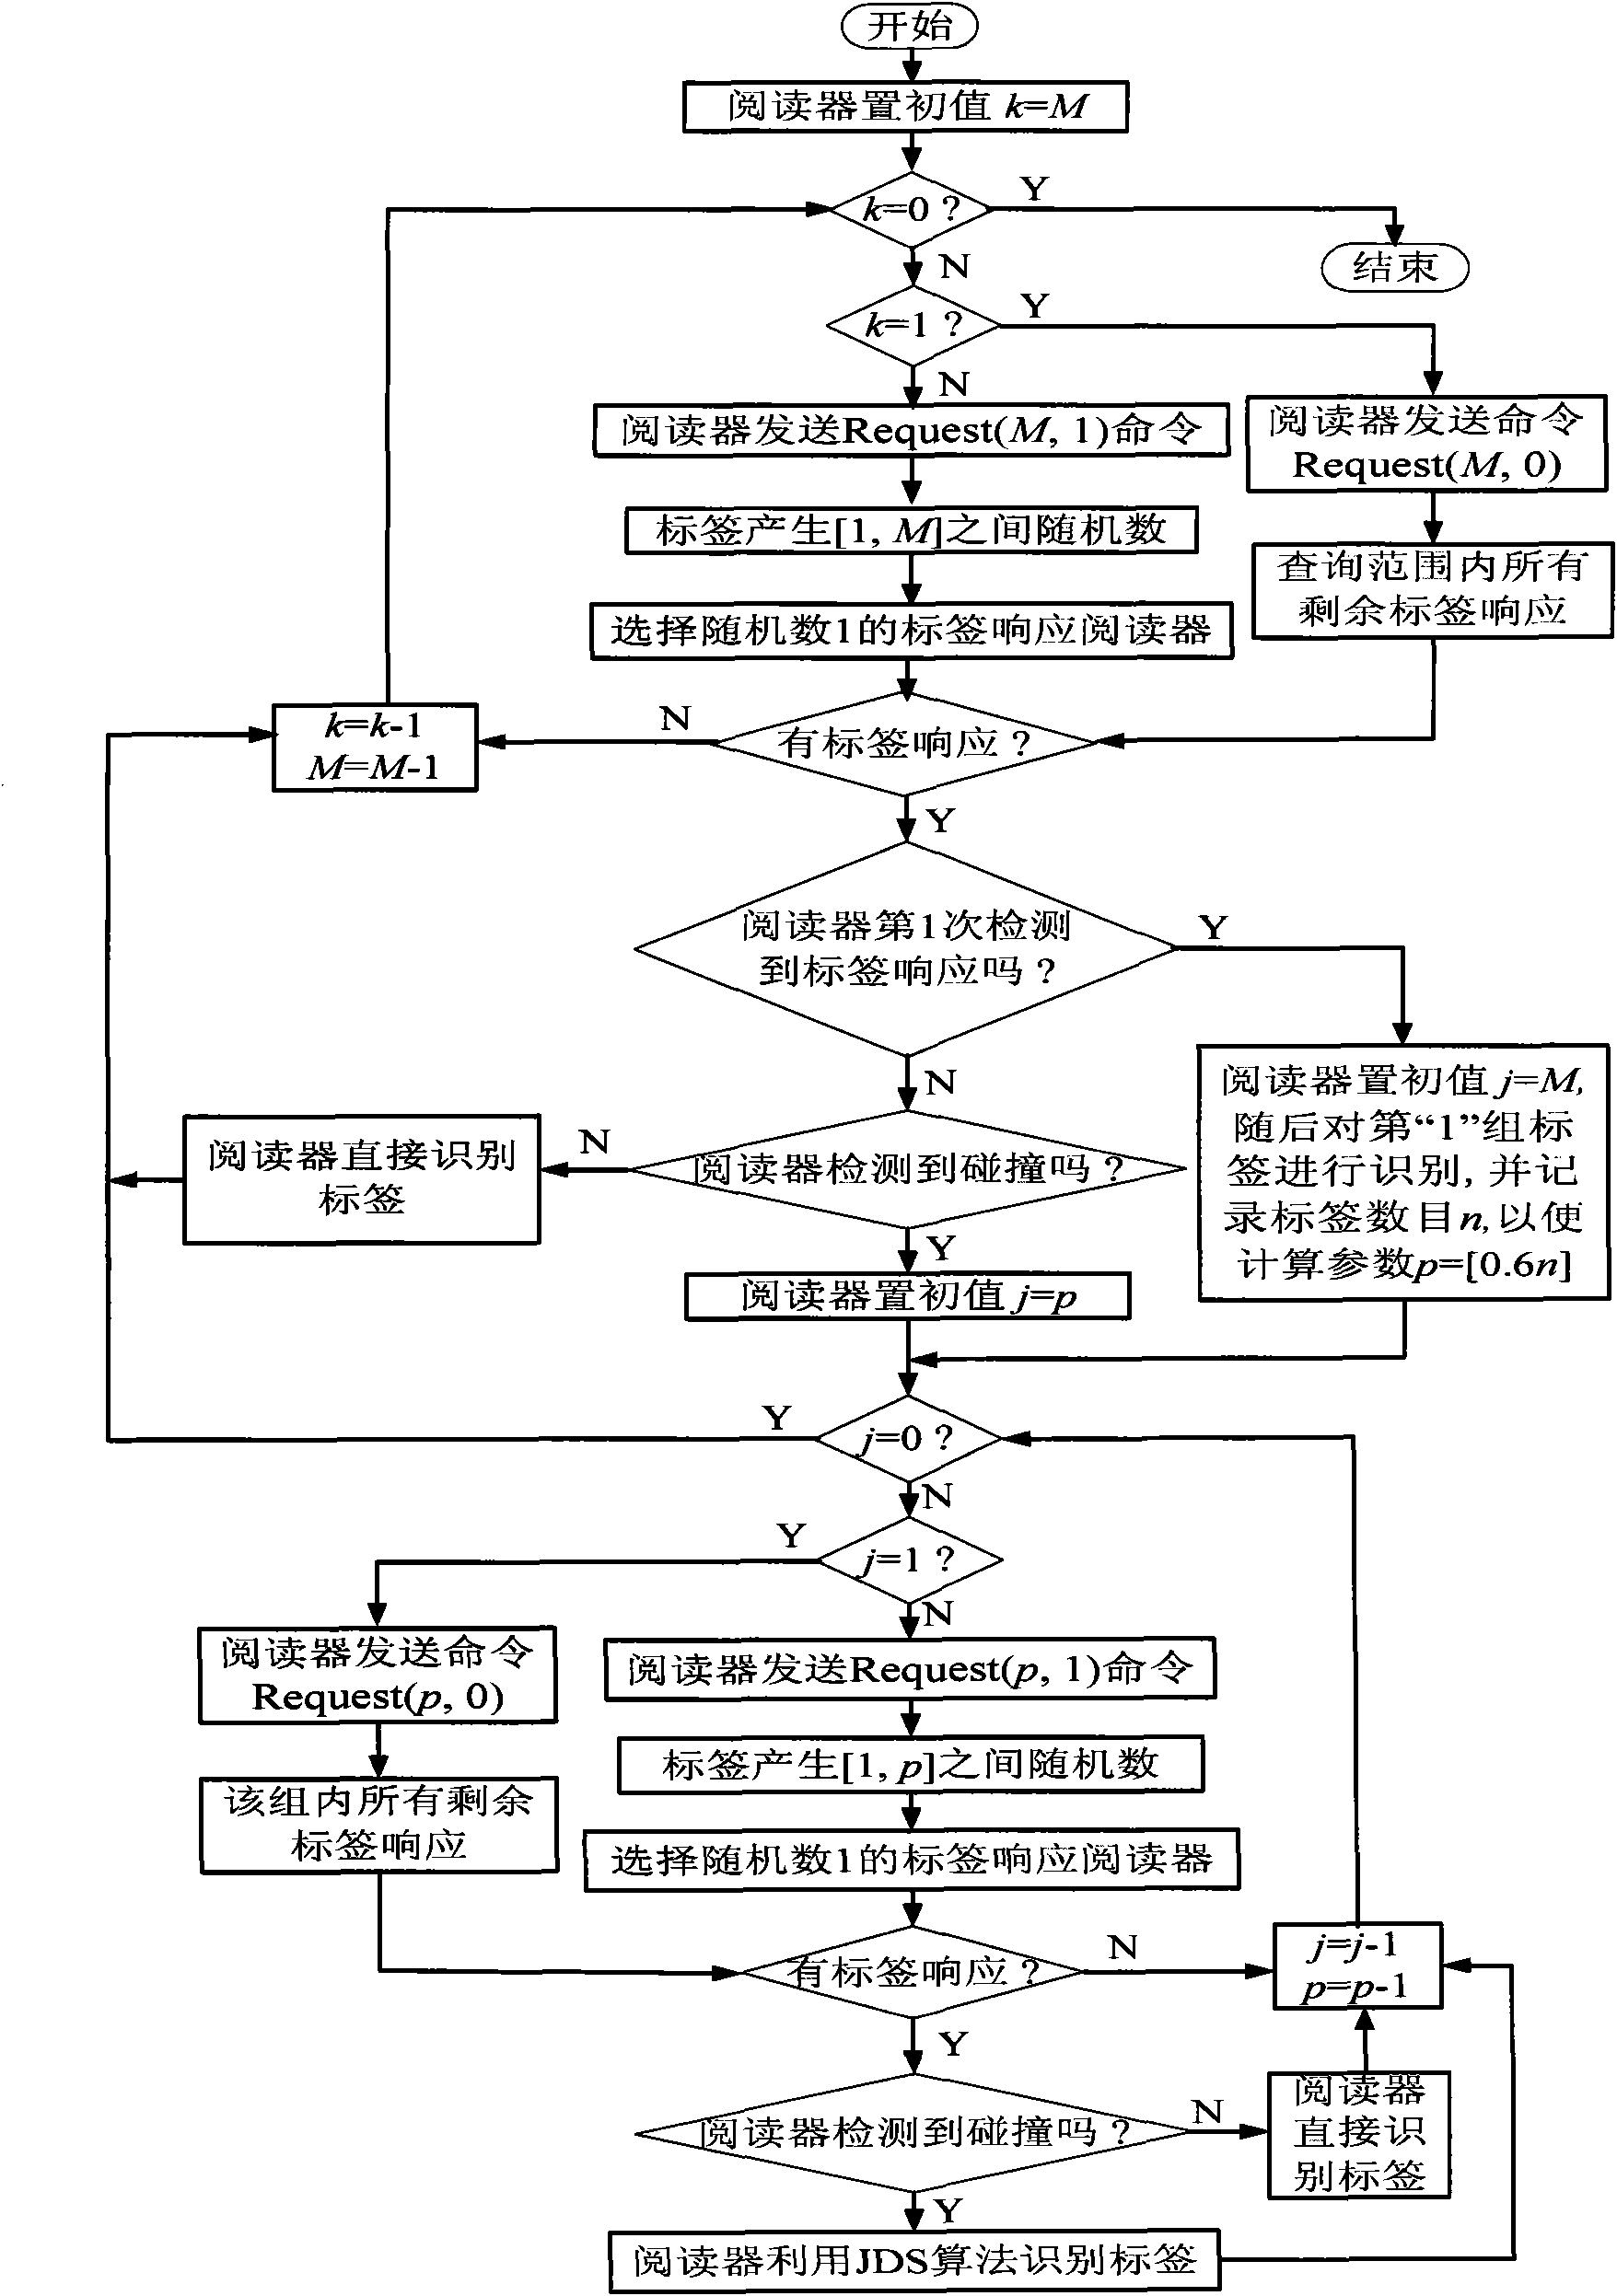 Multi-label anti-collision method based on grouping mechanism and jumping dynamic binary recognition